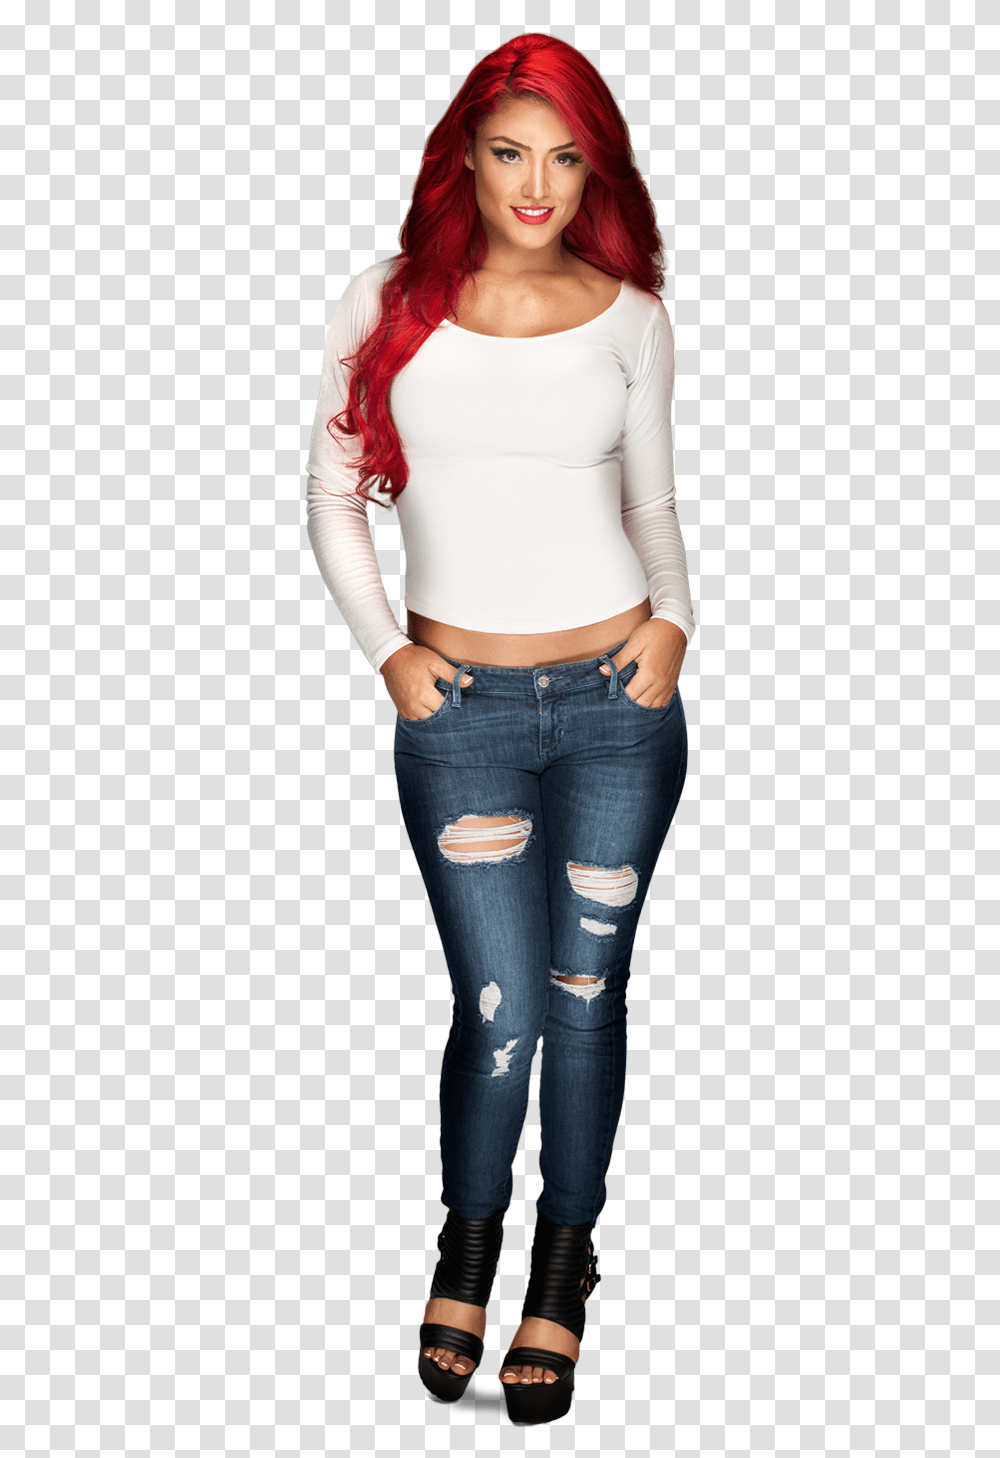 Wwe Girl Image Hd Full, Pants, Jeans, Person Transparent Png